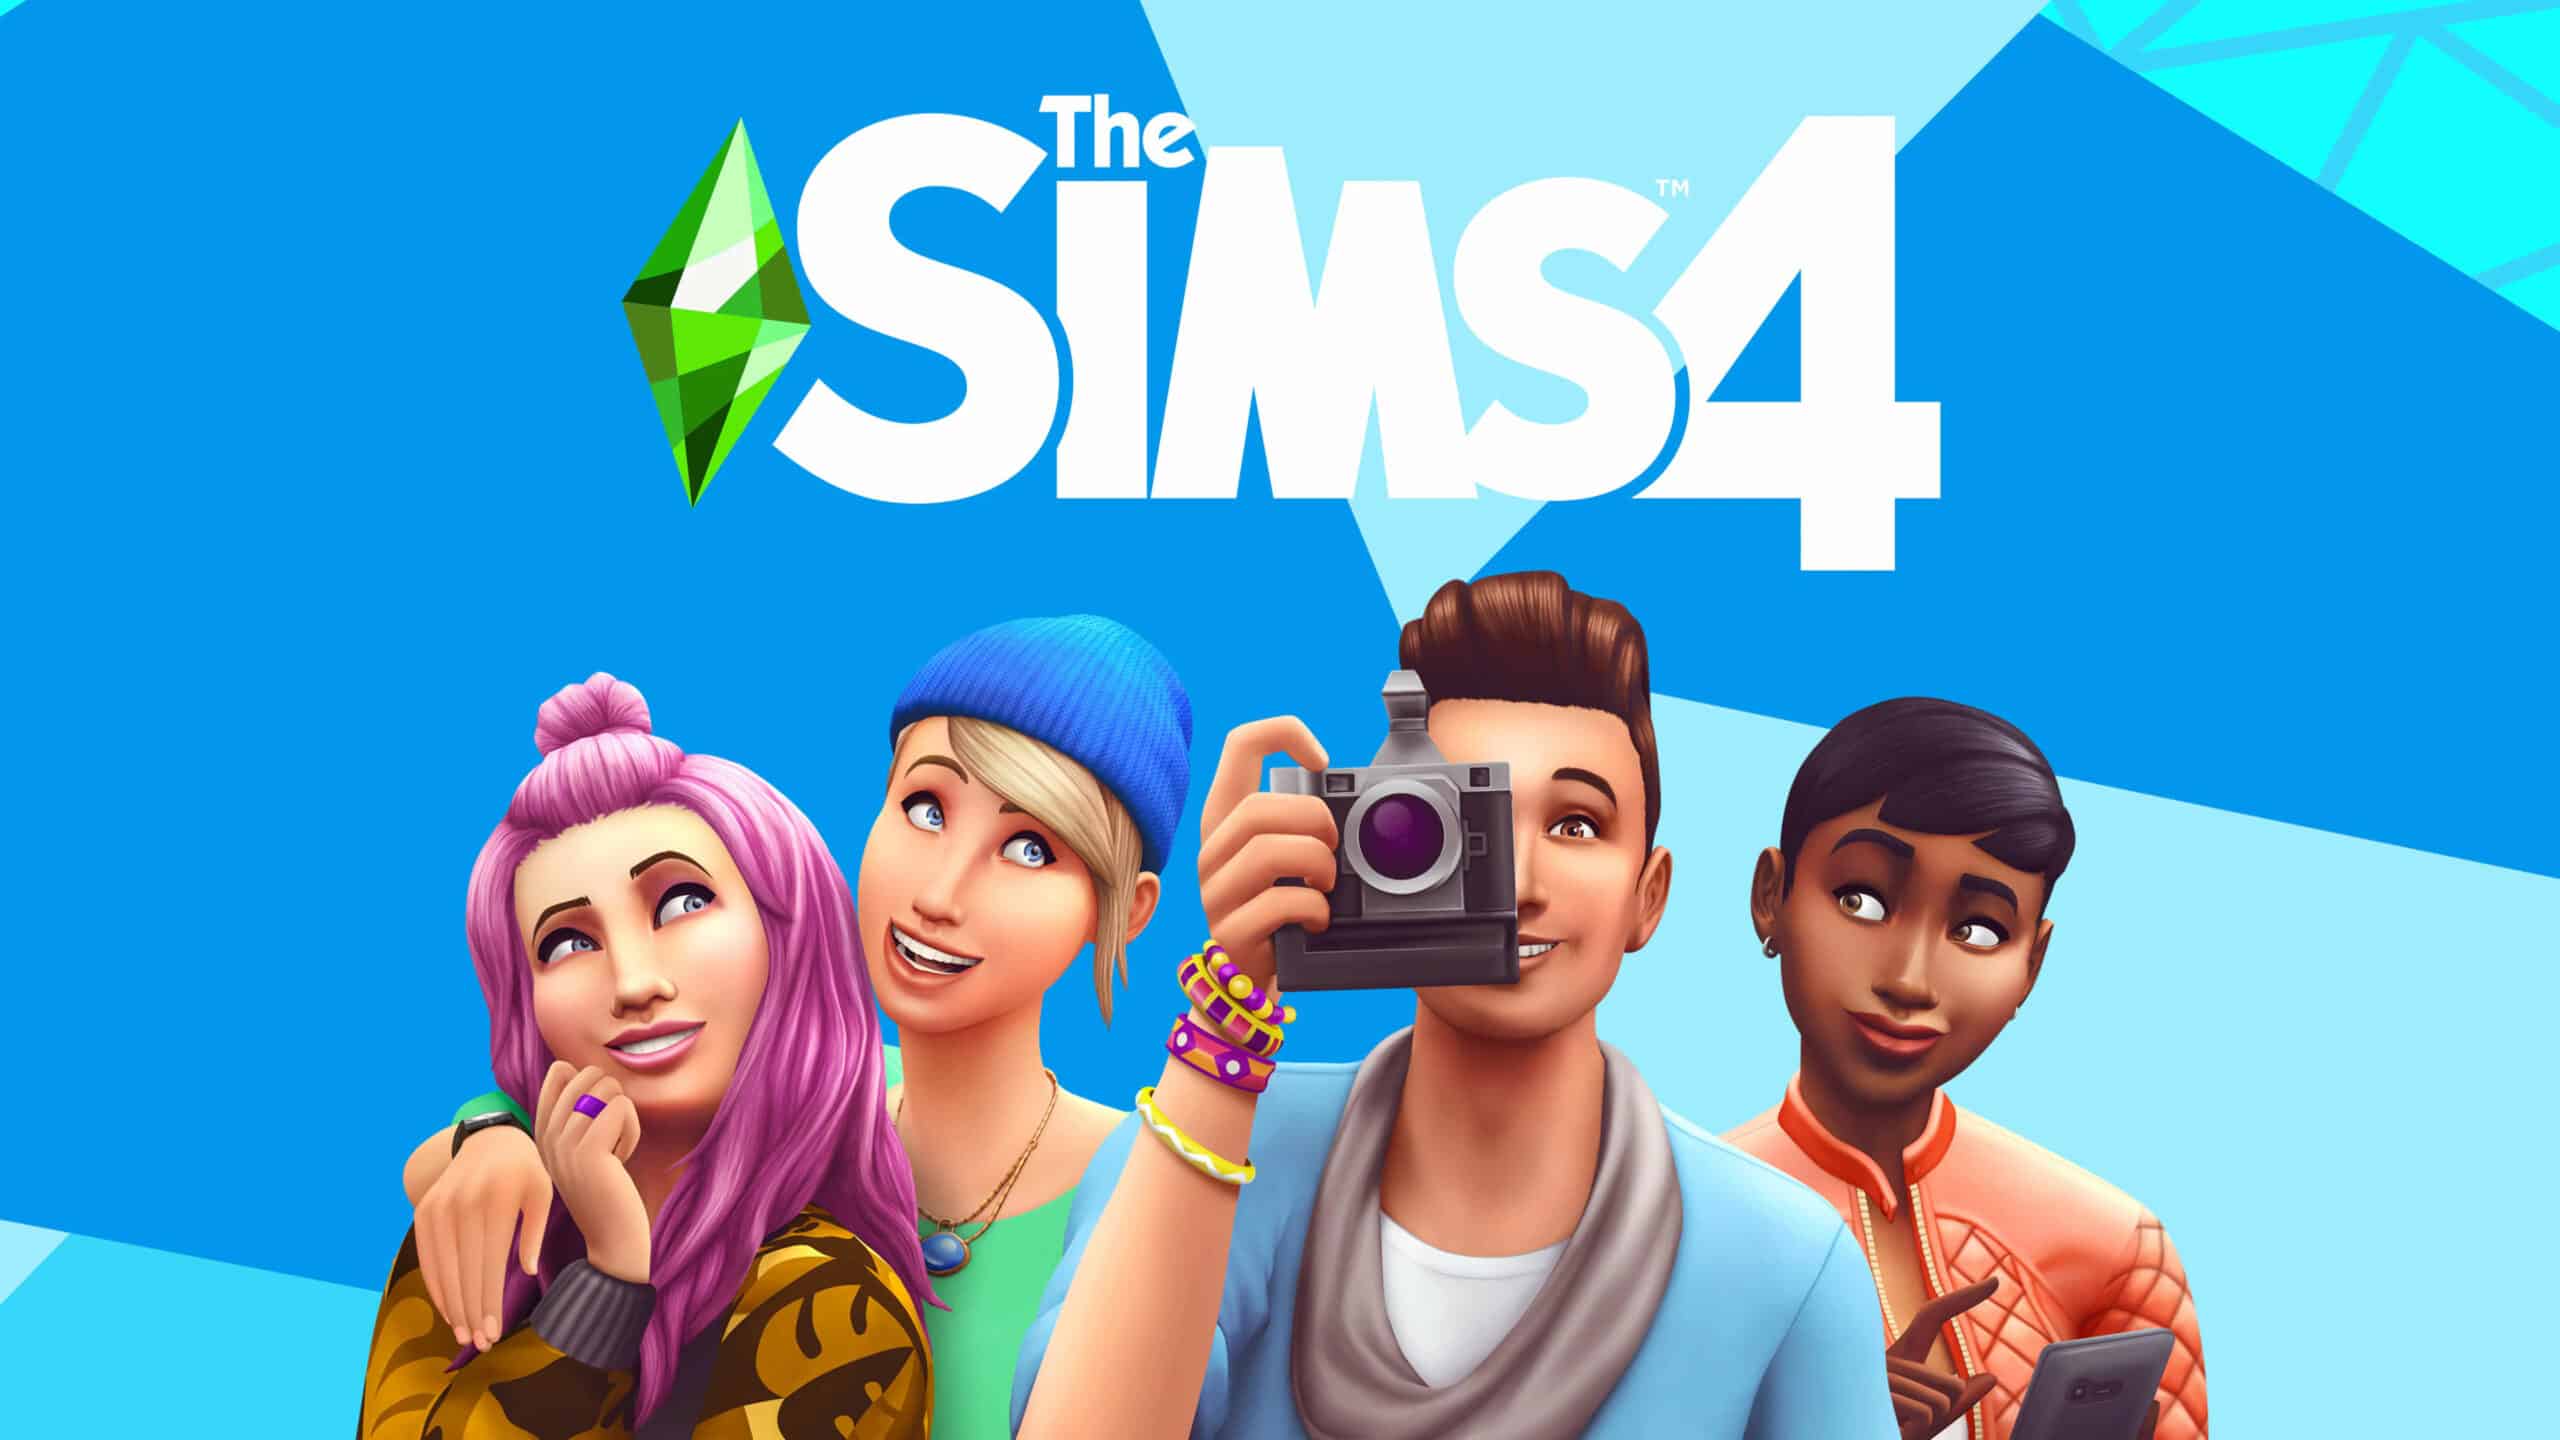 The Sims 4 is a casual game that you can play for hundreds of hours without getting bored.